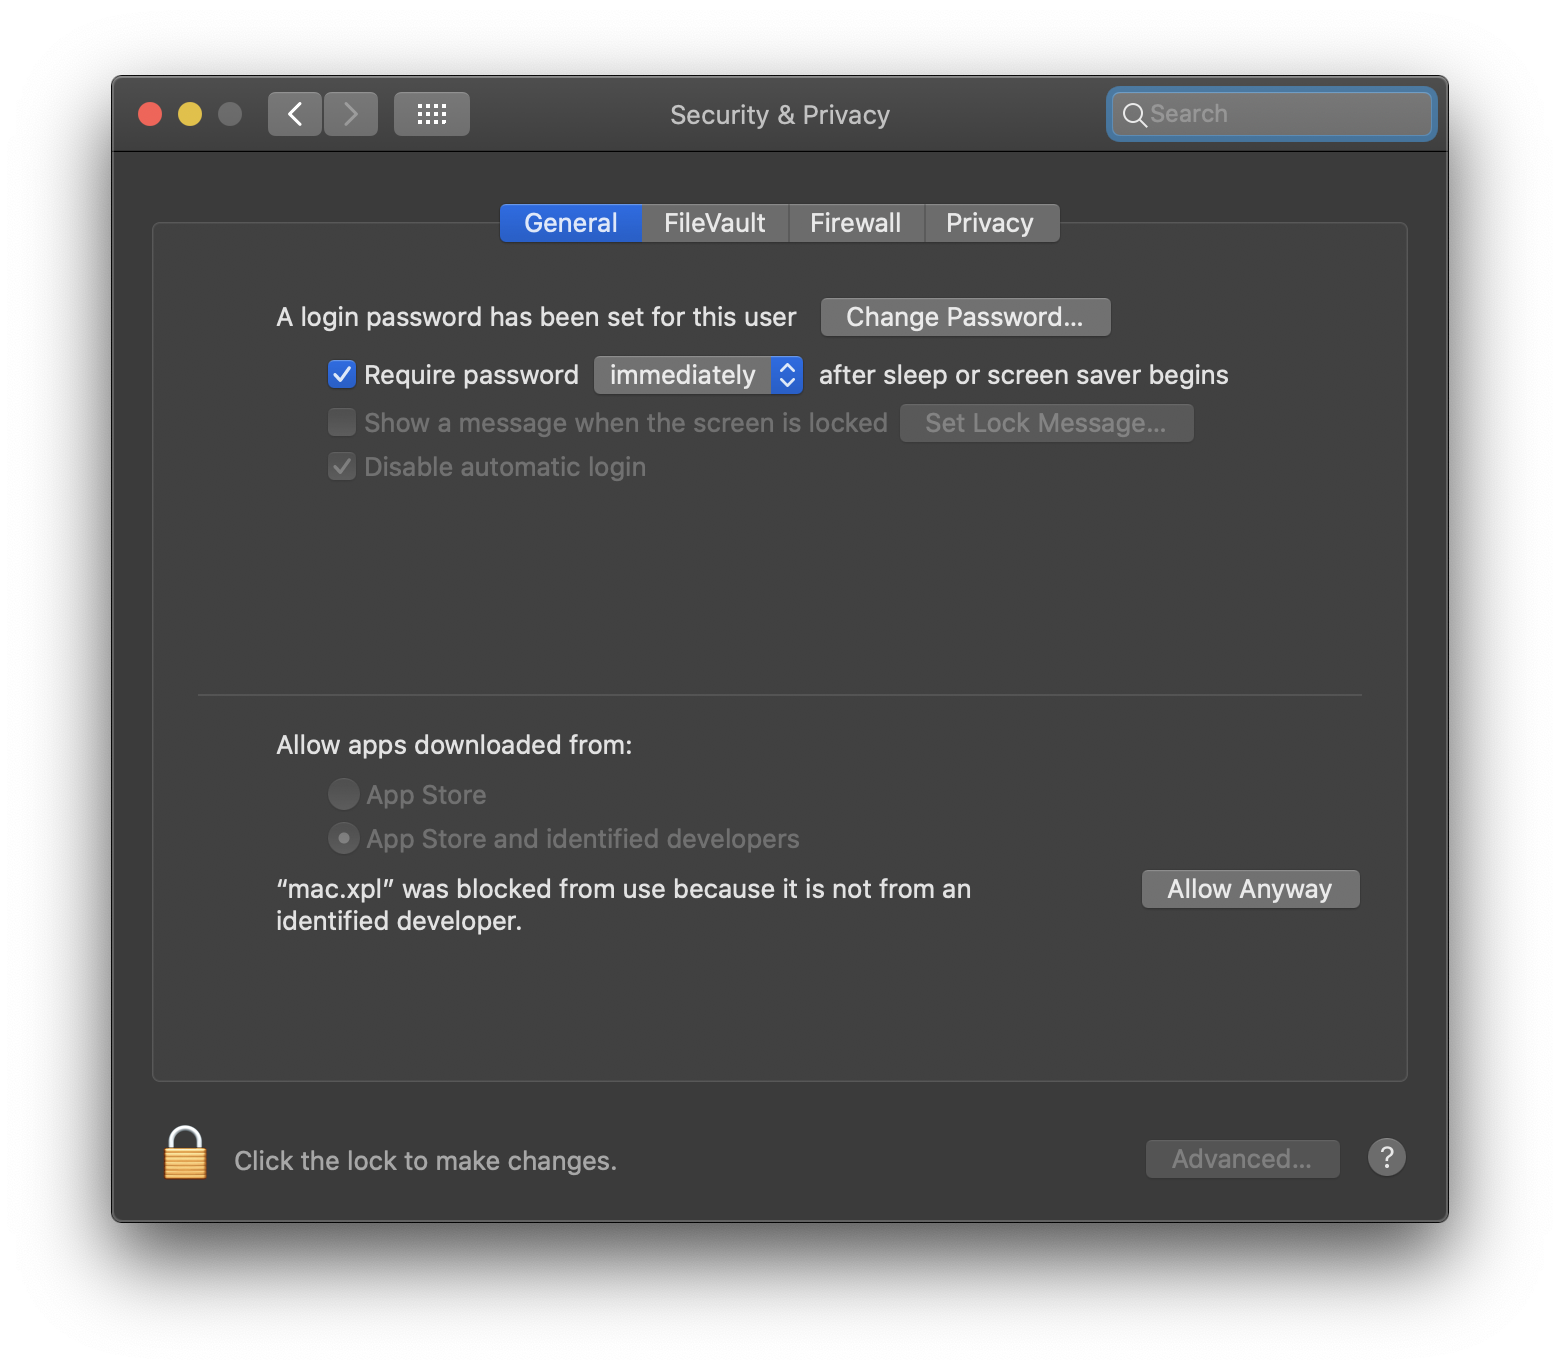 Security and privacy settings to allow mac.xpl